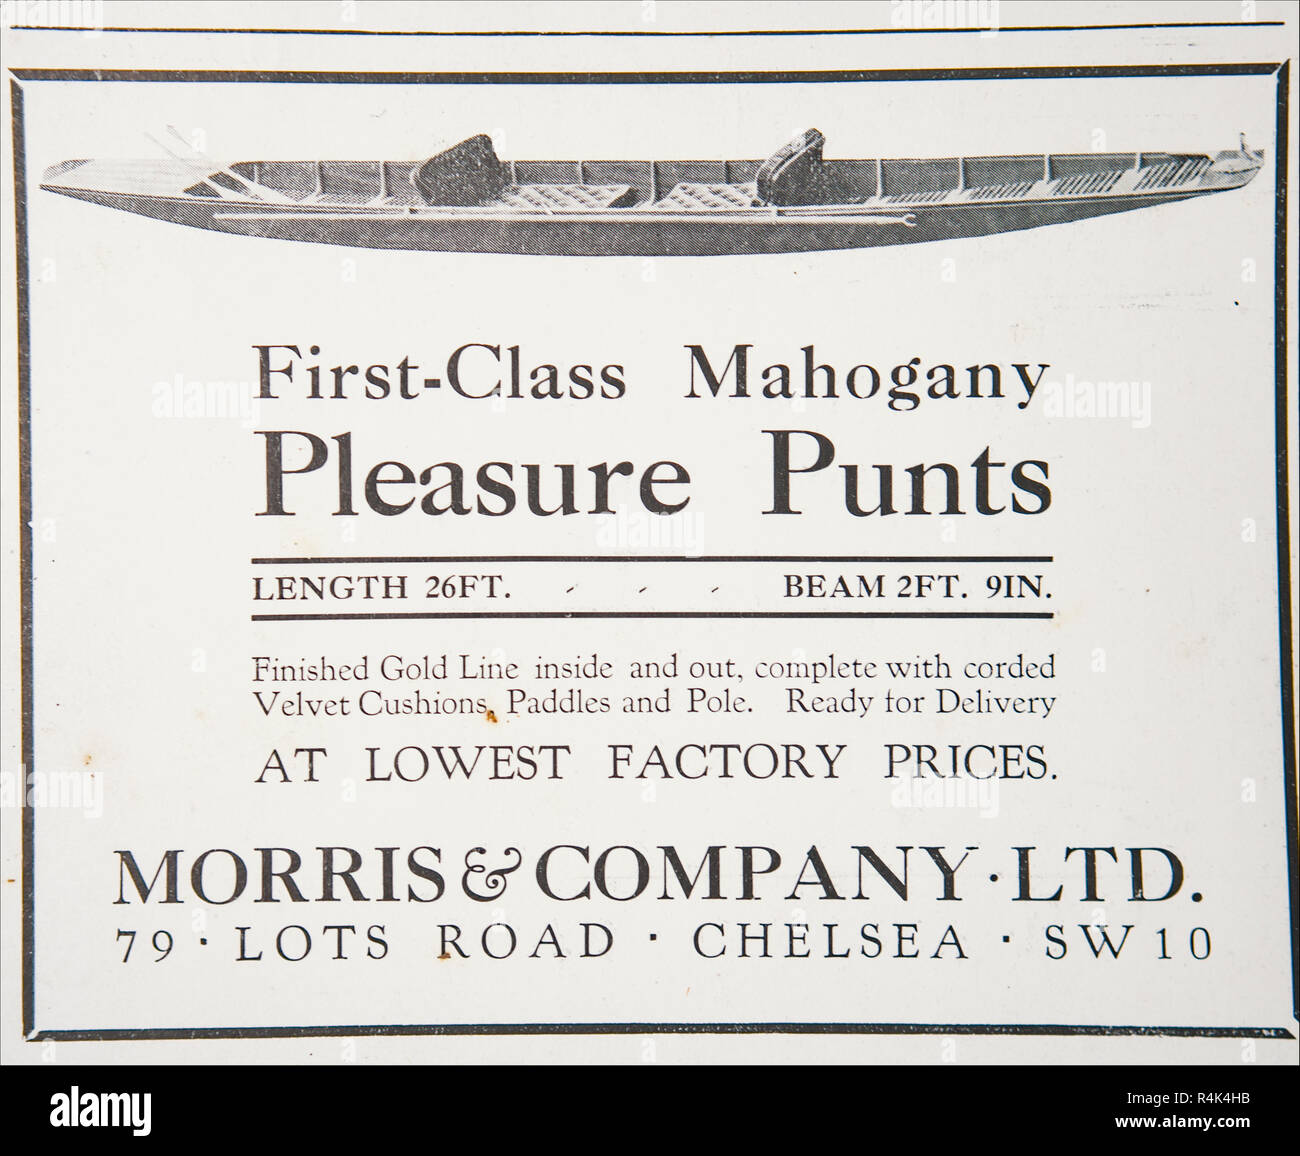 An old advert for Morris & Company mahogany pleasure punts. From an old British magazine from the 1914-1918 period. Stock Photo